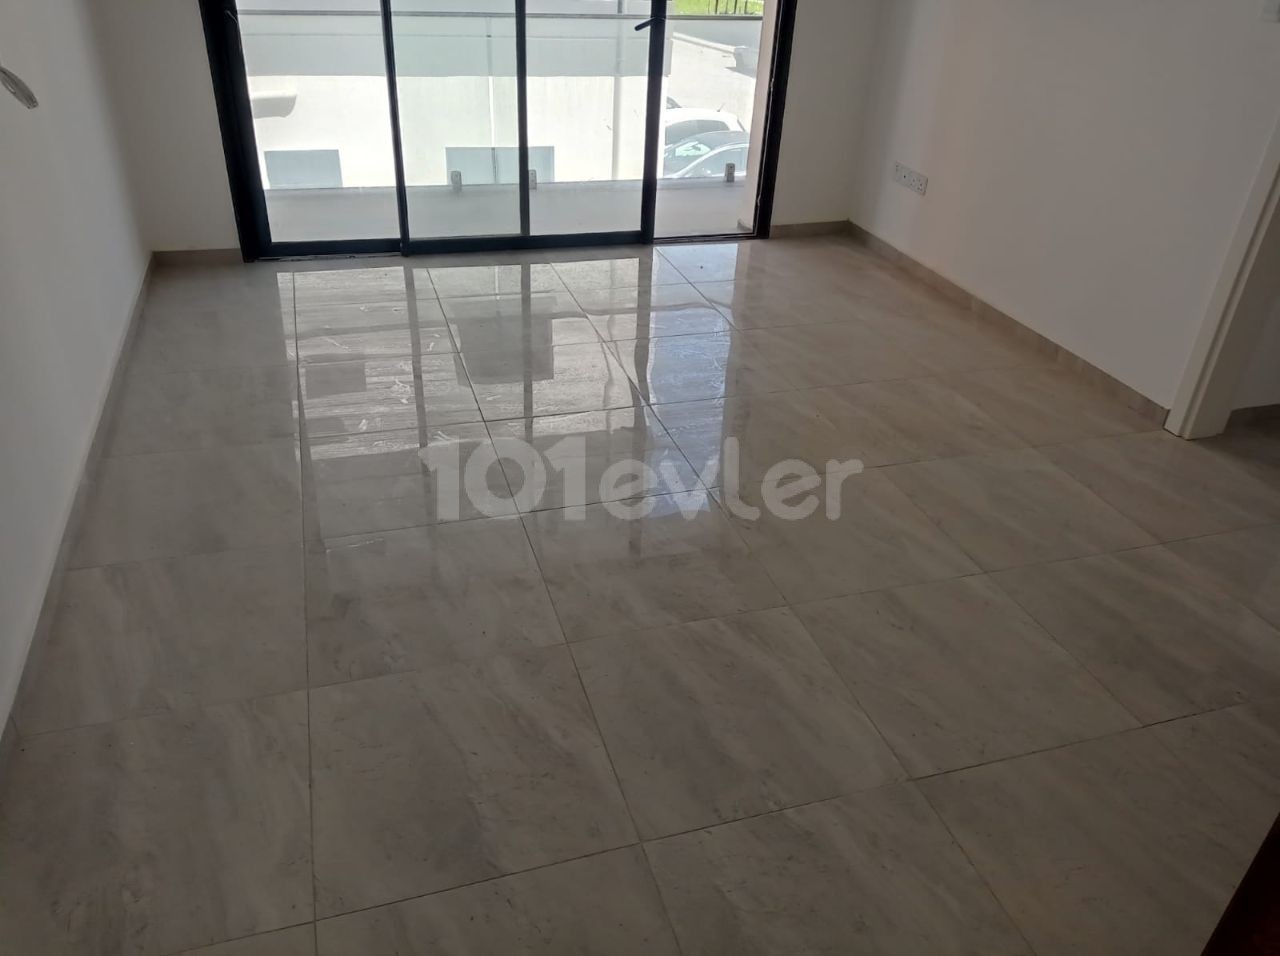 85M2 TURKISH OPPORTUNITY APARTMENT ON THE GROUND FLOOR IN THE SMALL KAYMAKLI DISTRICT (2 +1) ** 